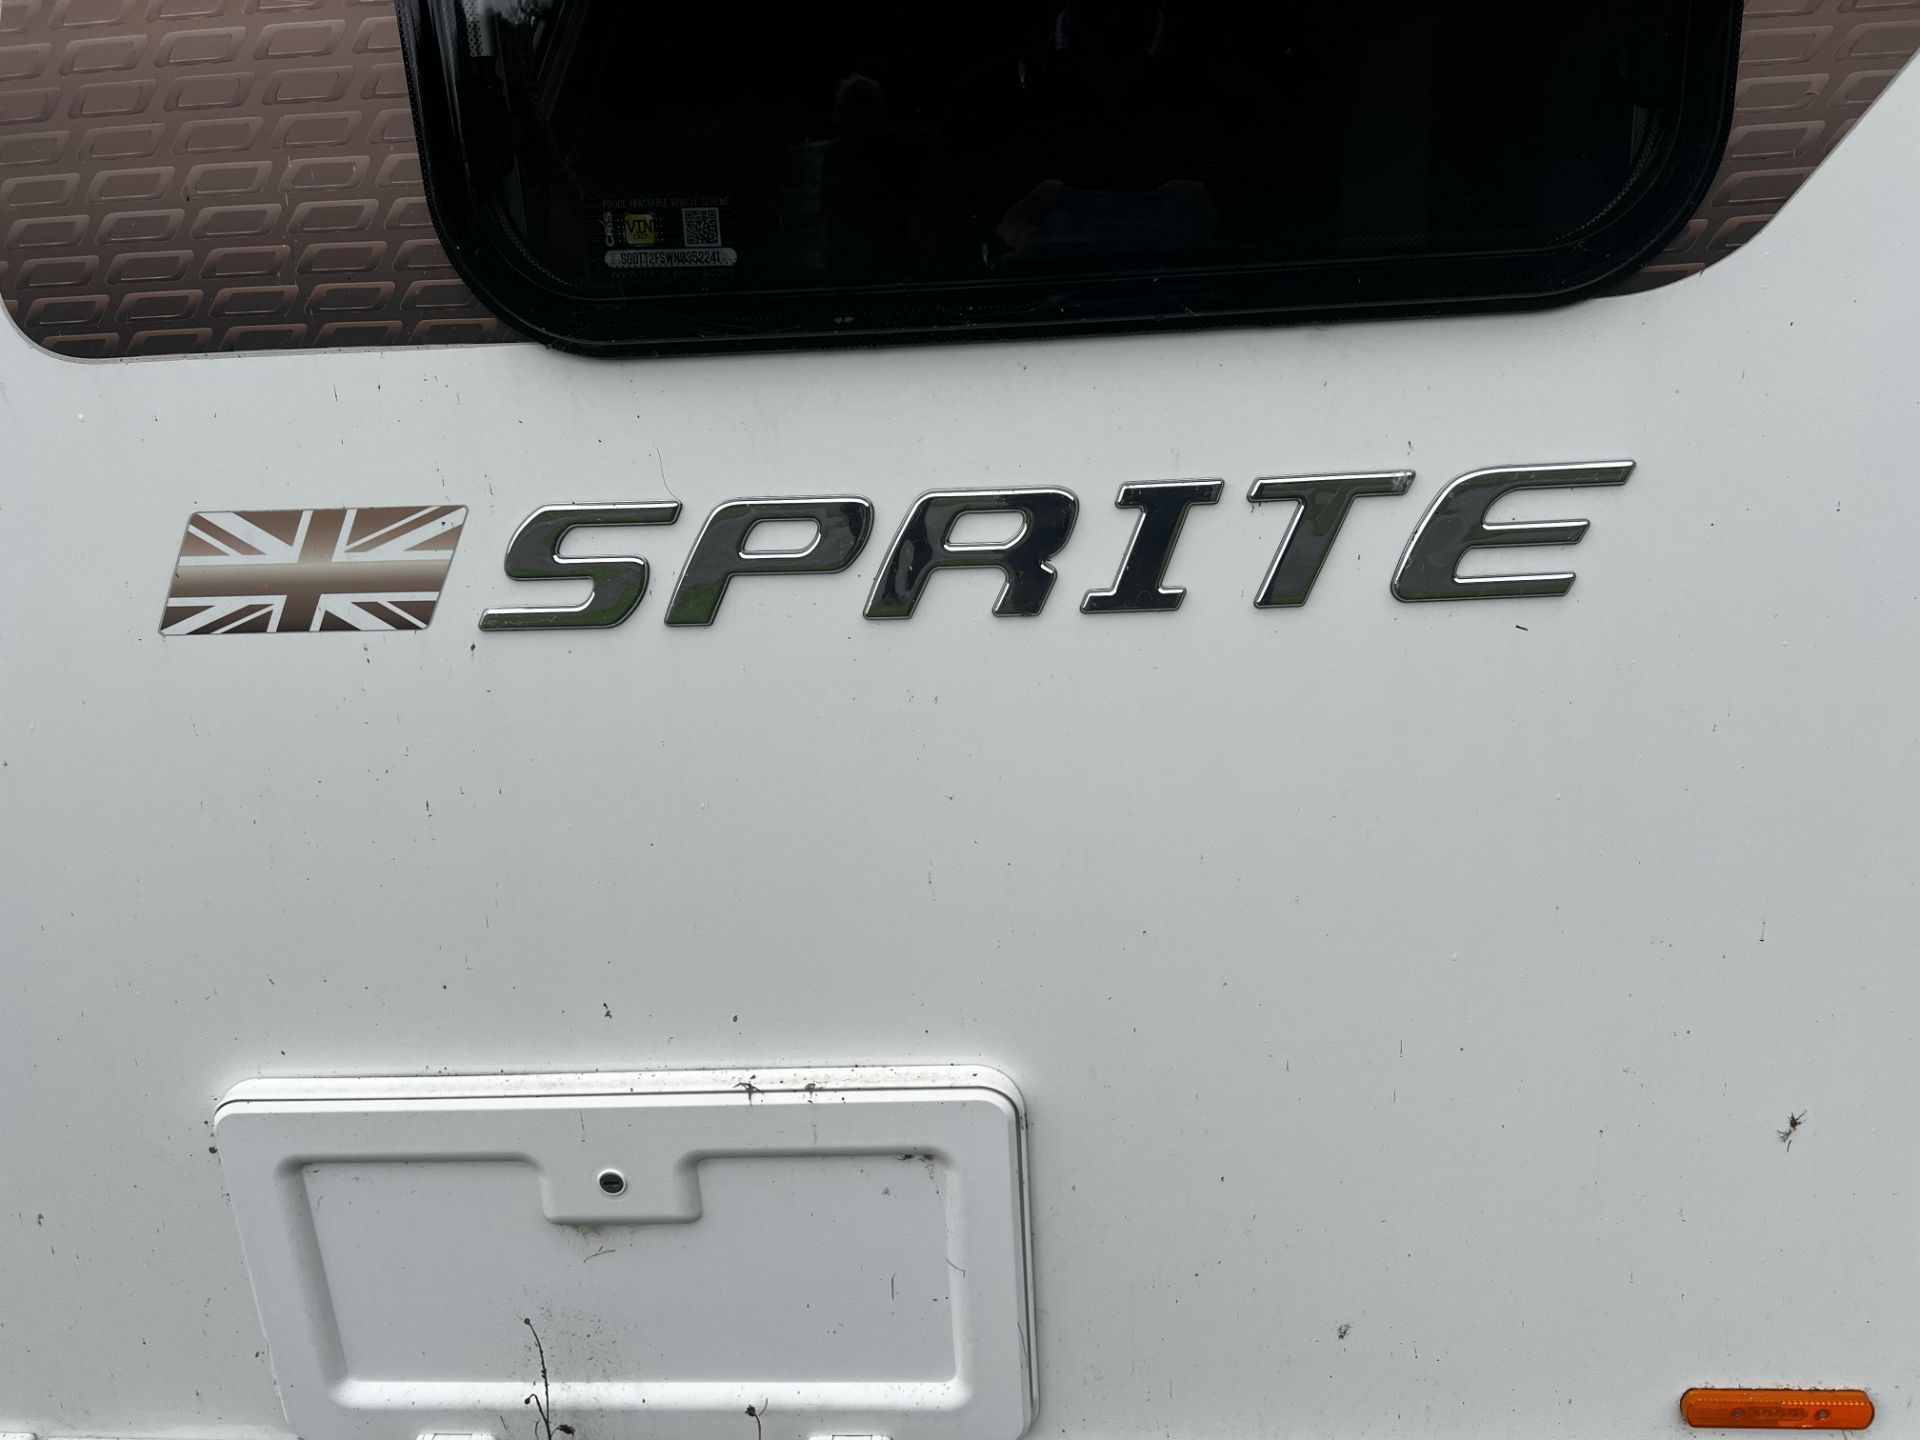 Sprite Caravan Swift Quatro EW, purchased new March 2022 double axle wheel base, cooker, 3 ring hob, - Image 5 of 23